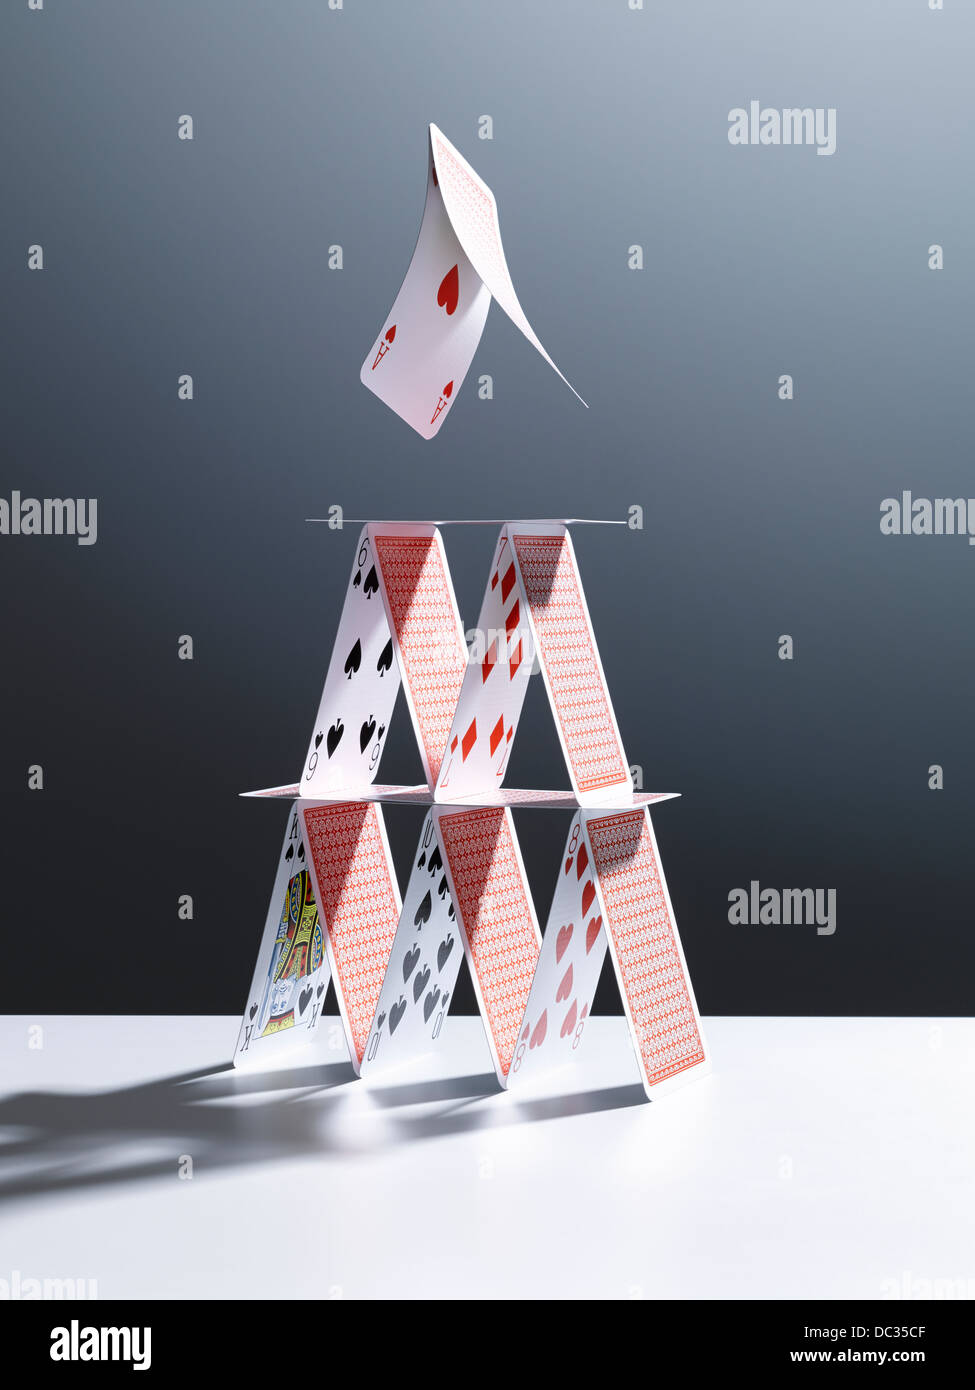 Cards jumping above house of cards Stock Photo